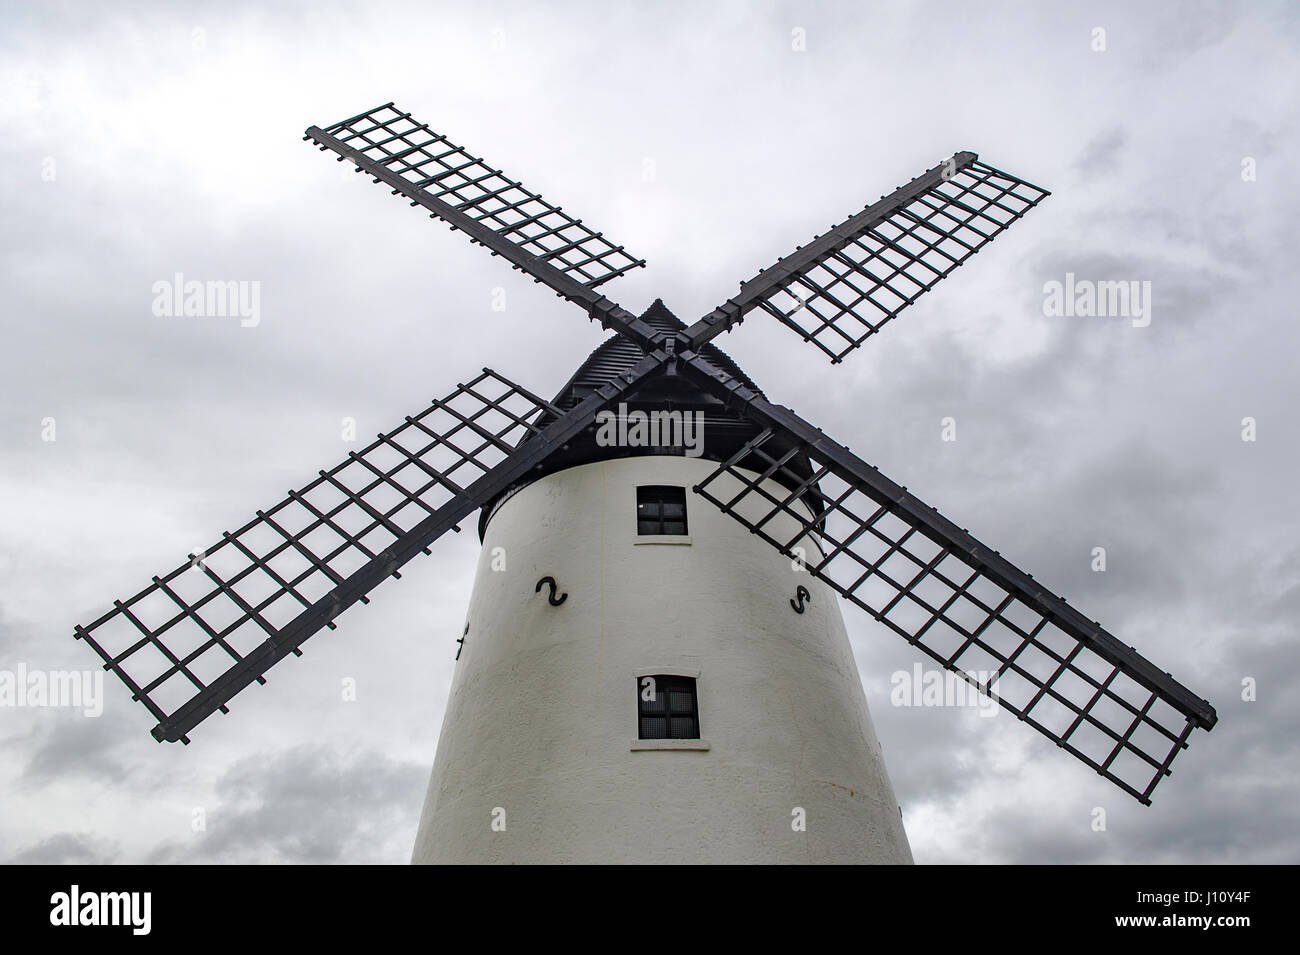 Lytham Windmill built in 1805 on Lytham Green, Lytham, Lancashire, England with copy space. Stock Photo